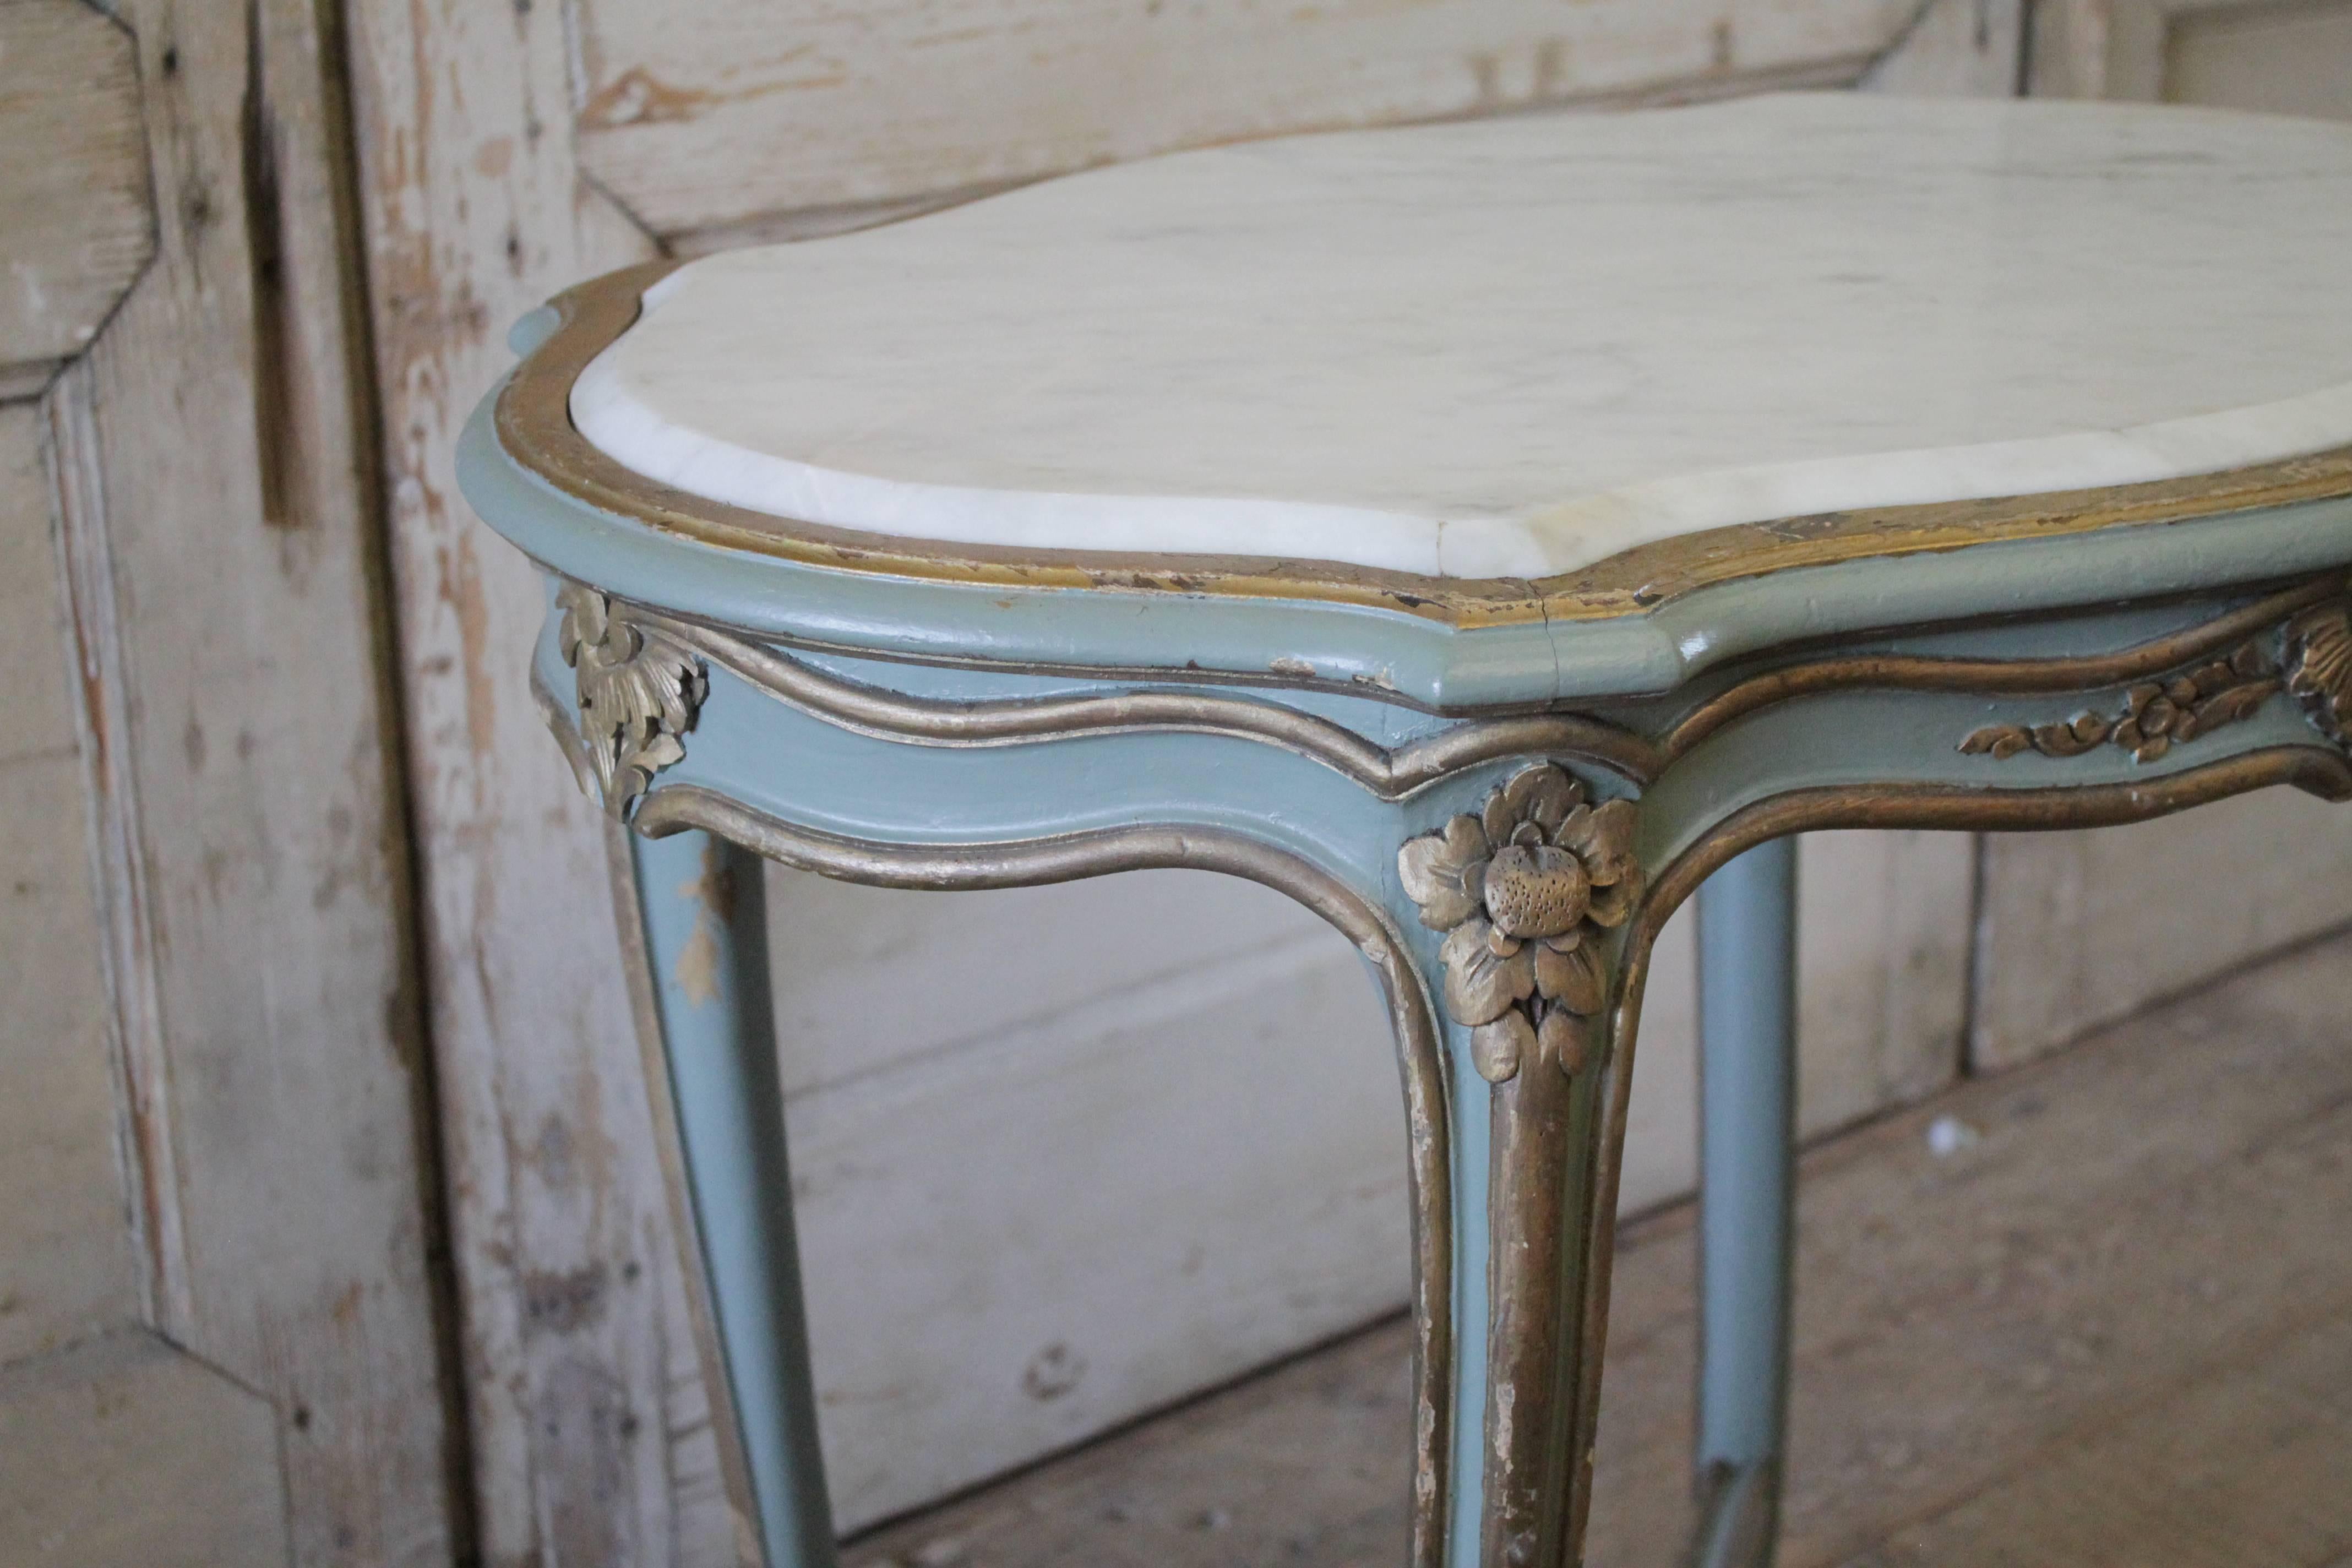 Painted in a blue-green grey color, with gilded highlights. Subtle distressed edges, and a white marble inset top. c1940, legs are sturdy, table is ready for daily use.
Measures: 31